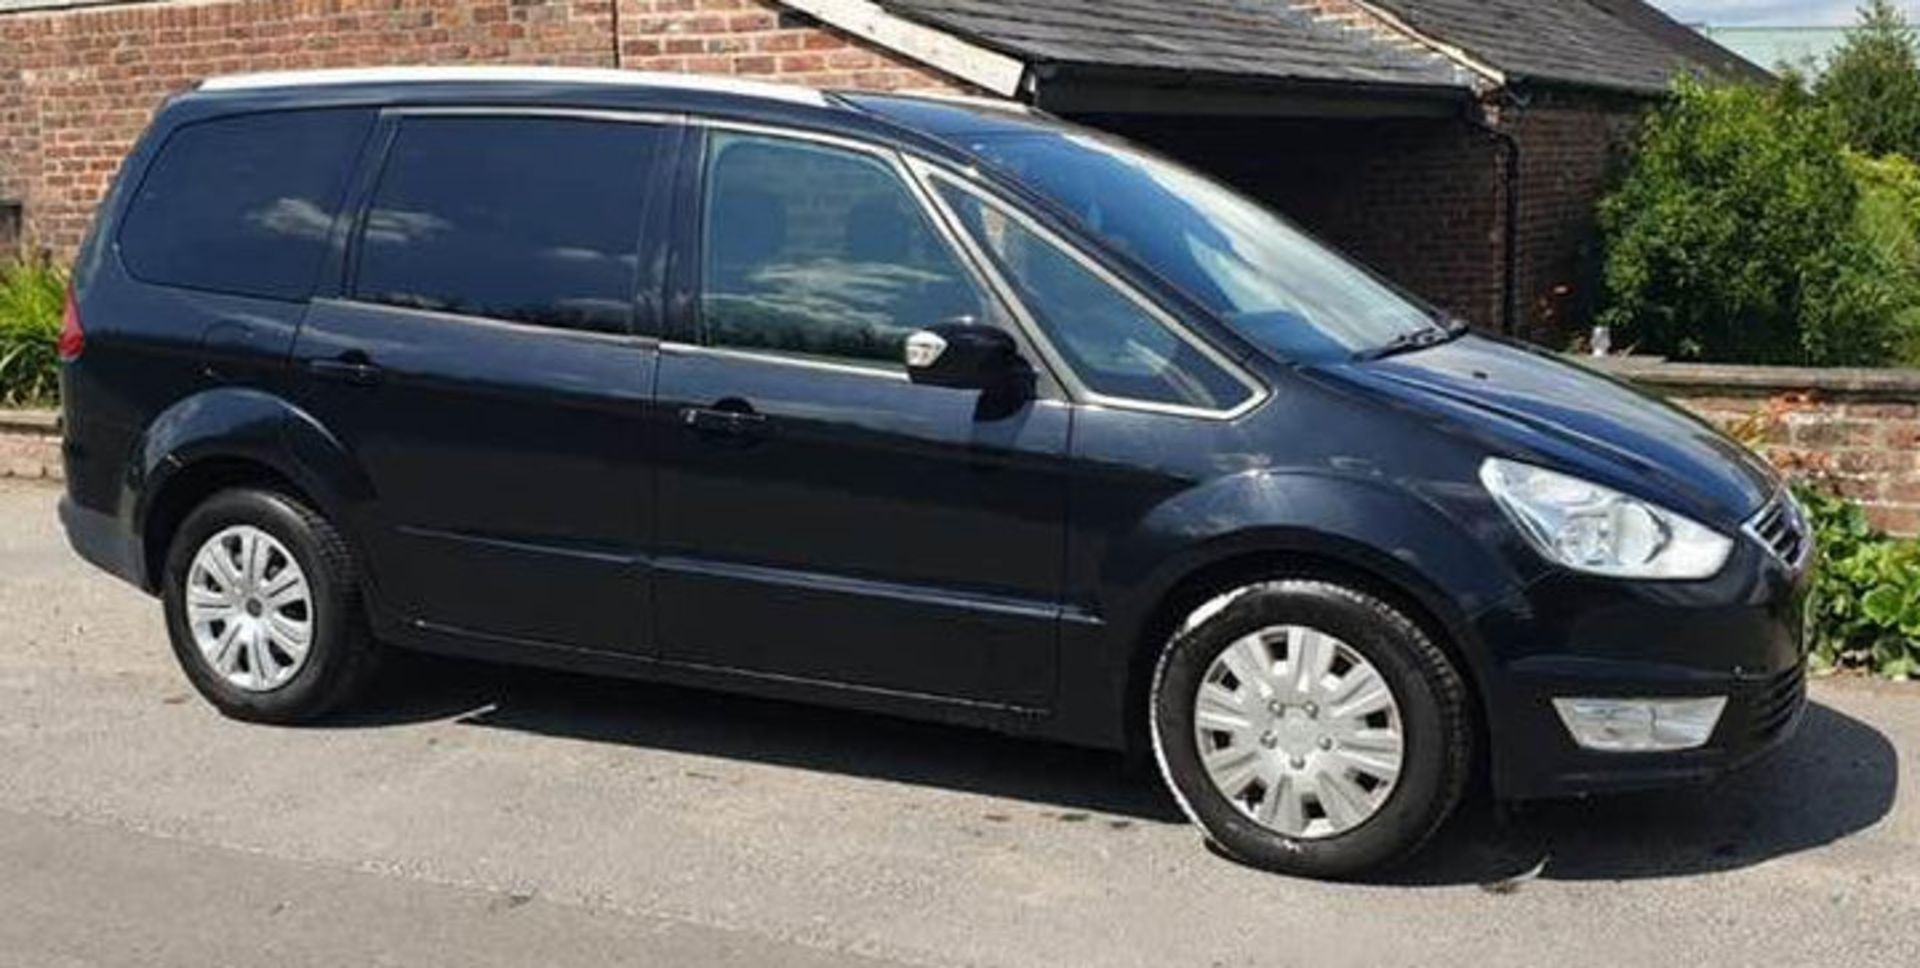 1 x 2014 Ford Galaxy 7-Seater Diesel MPV - Automatic - Black - 126000 Miles - CL331 - Location: - Image 6 of 9